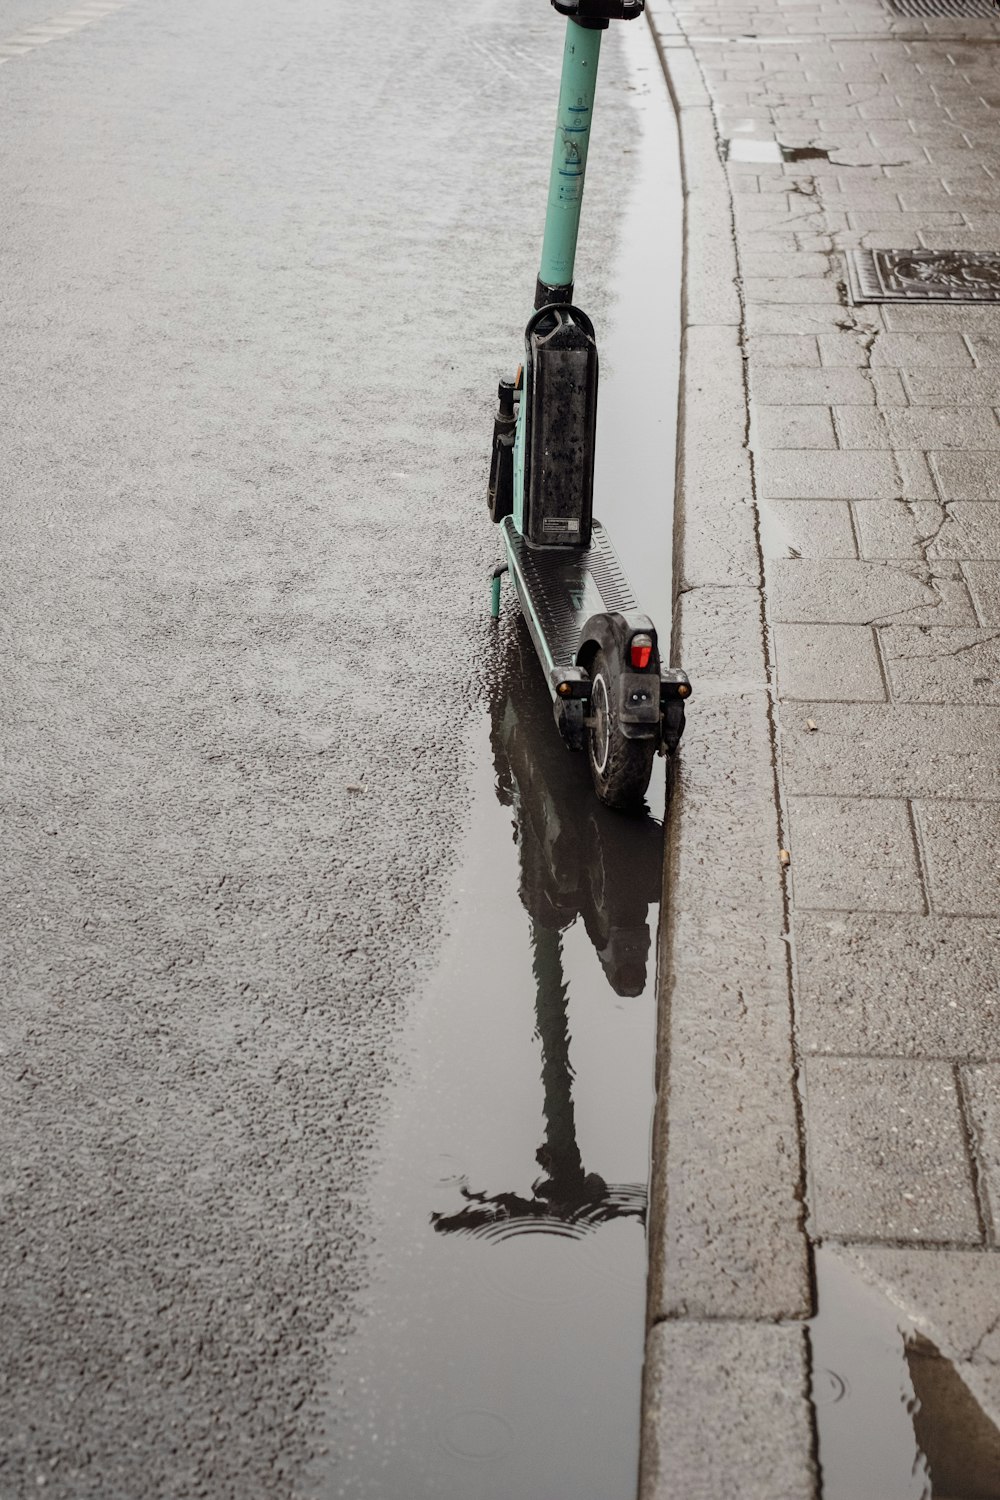 a parking meter sitting in the middle of a puddle of water